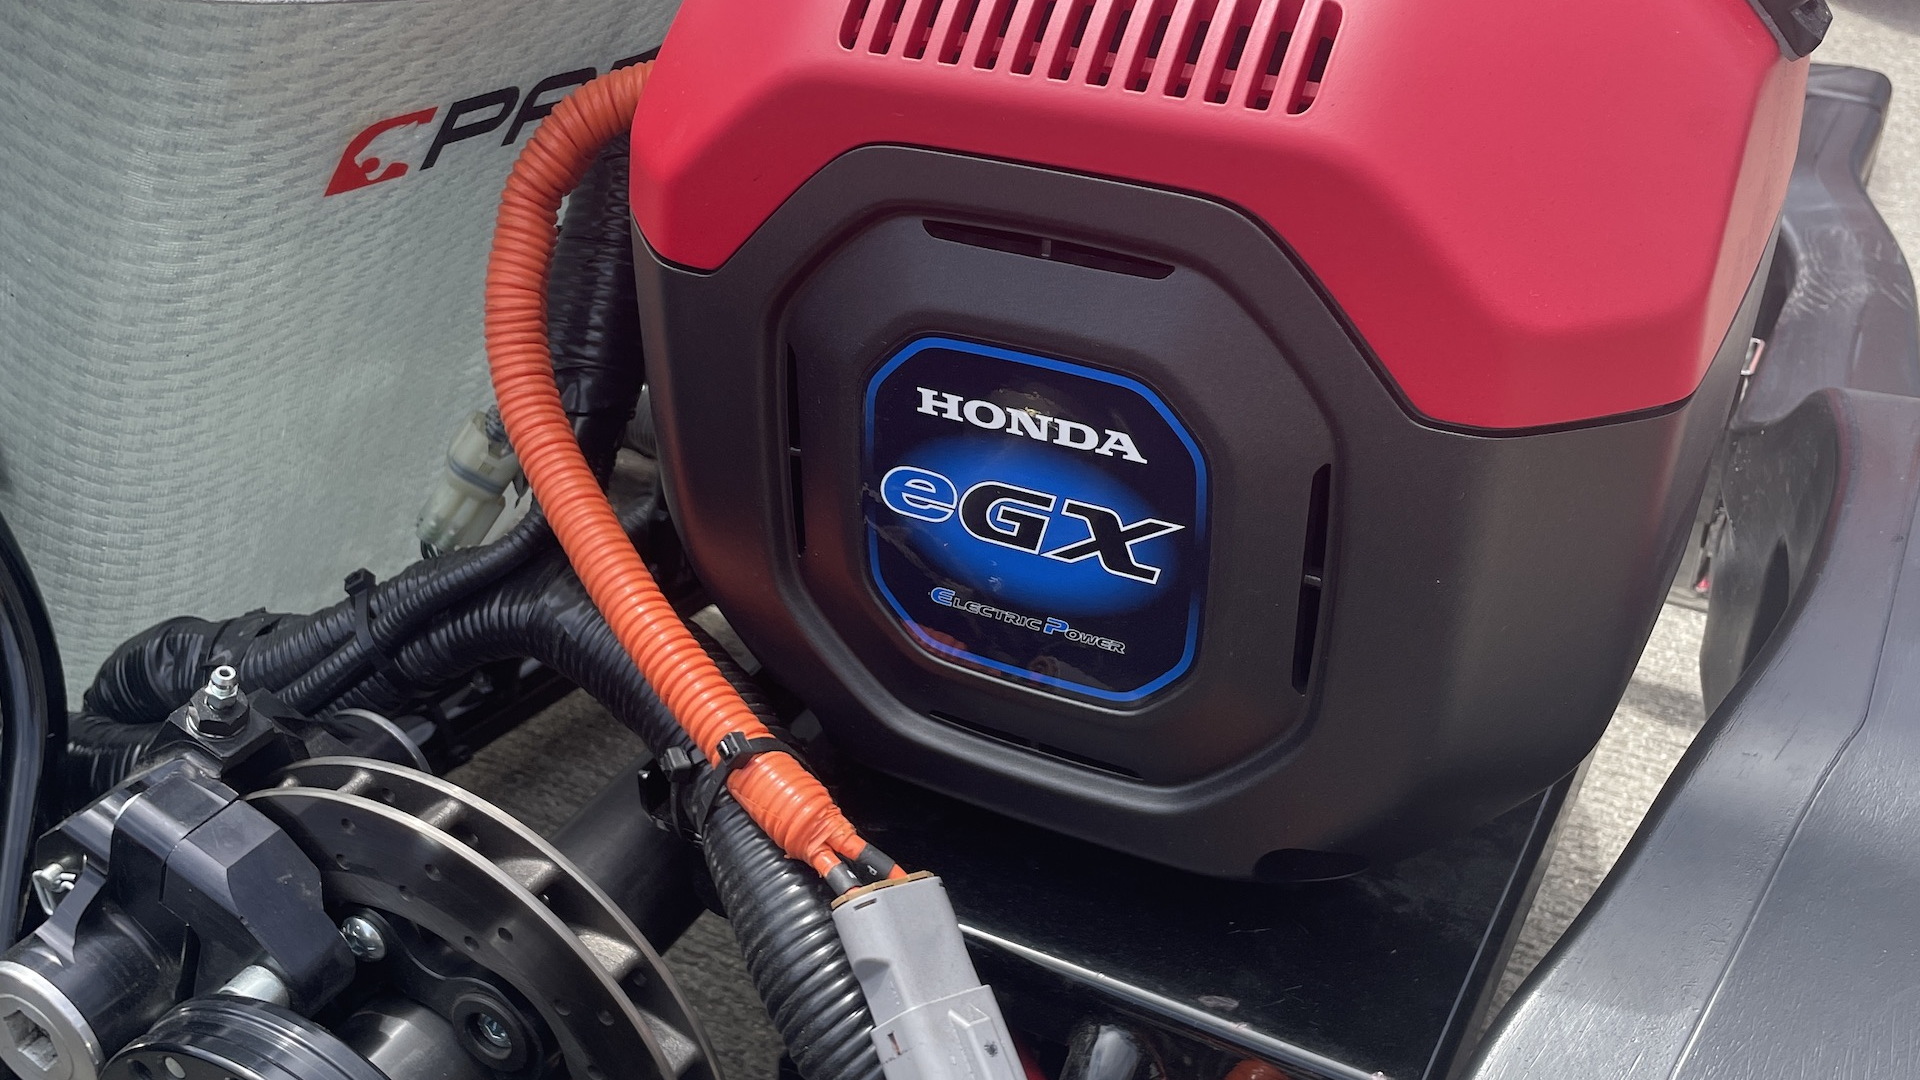 Honda's electric go-kart shows off its easily swappable battery system